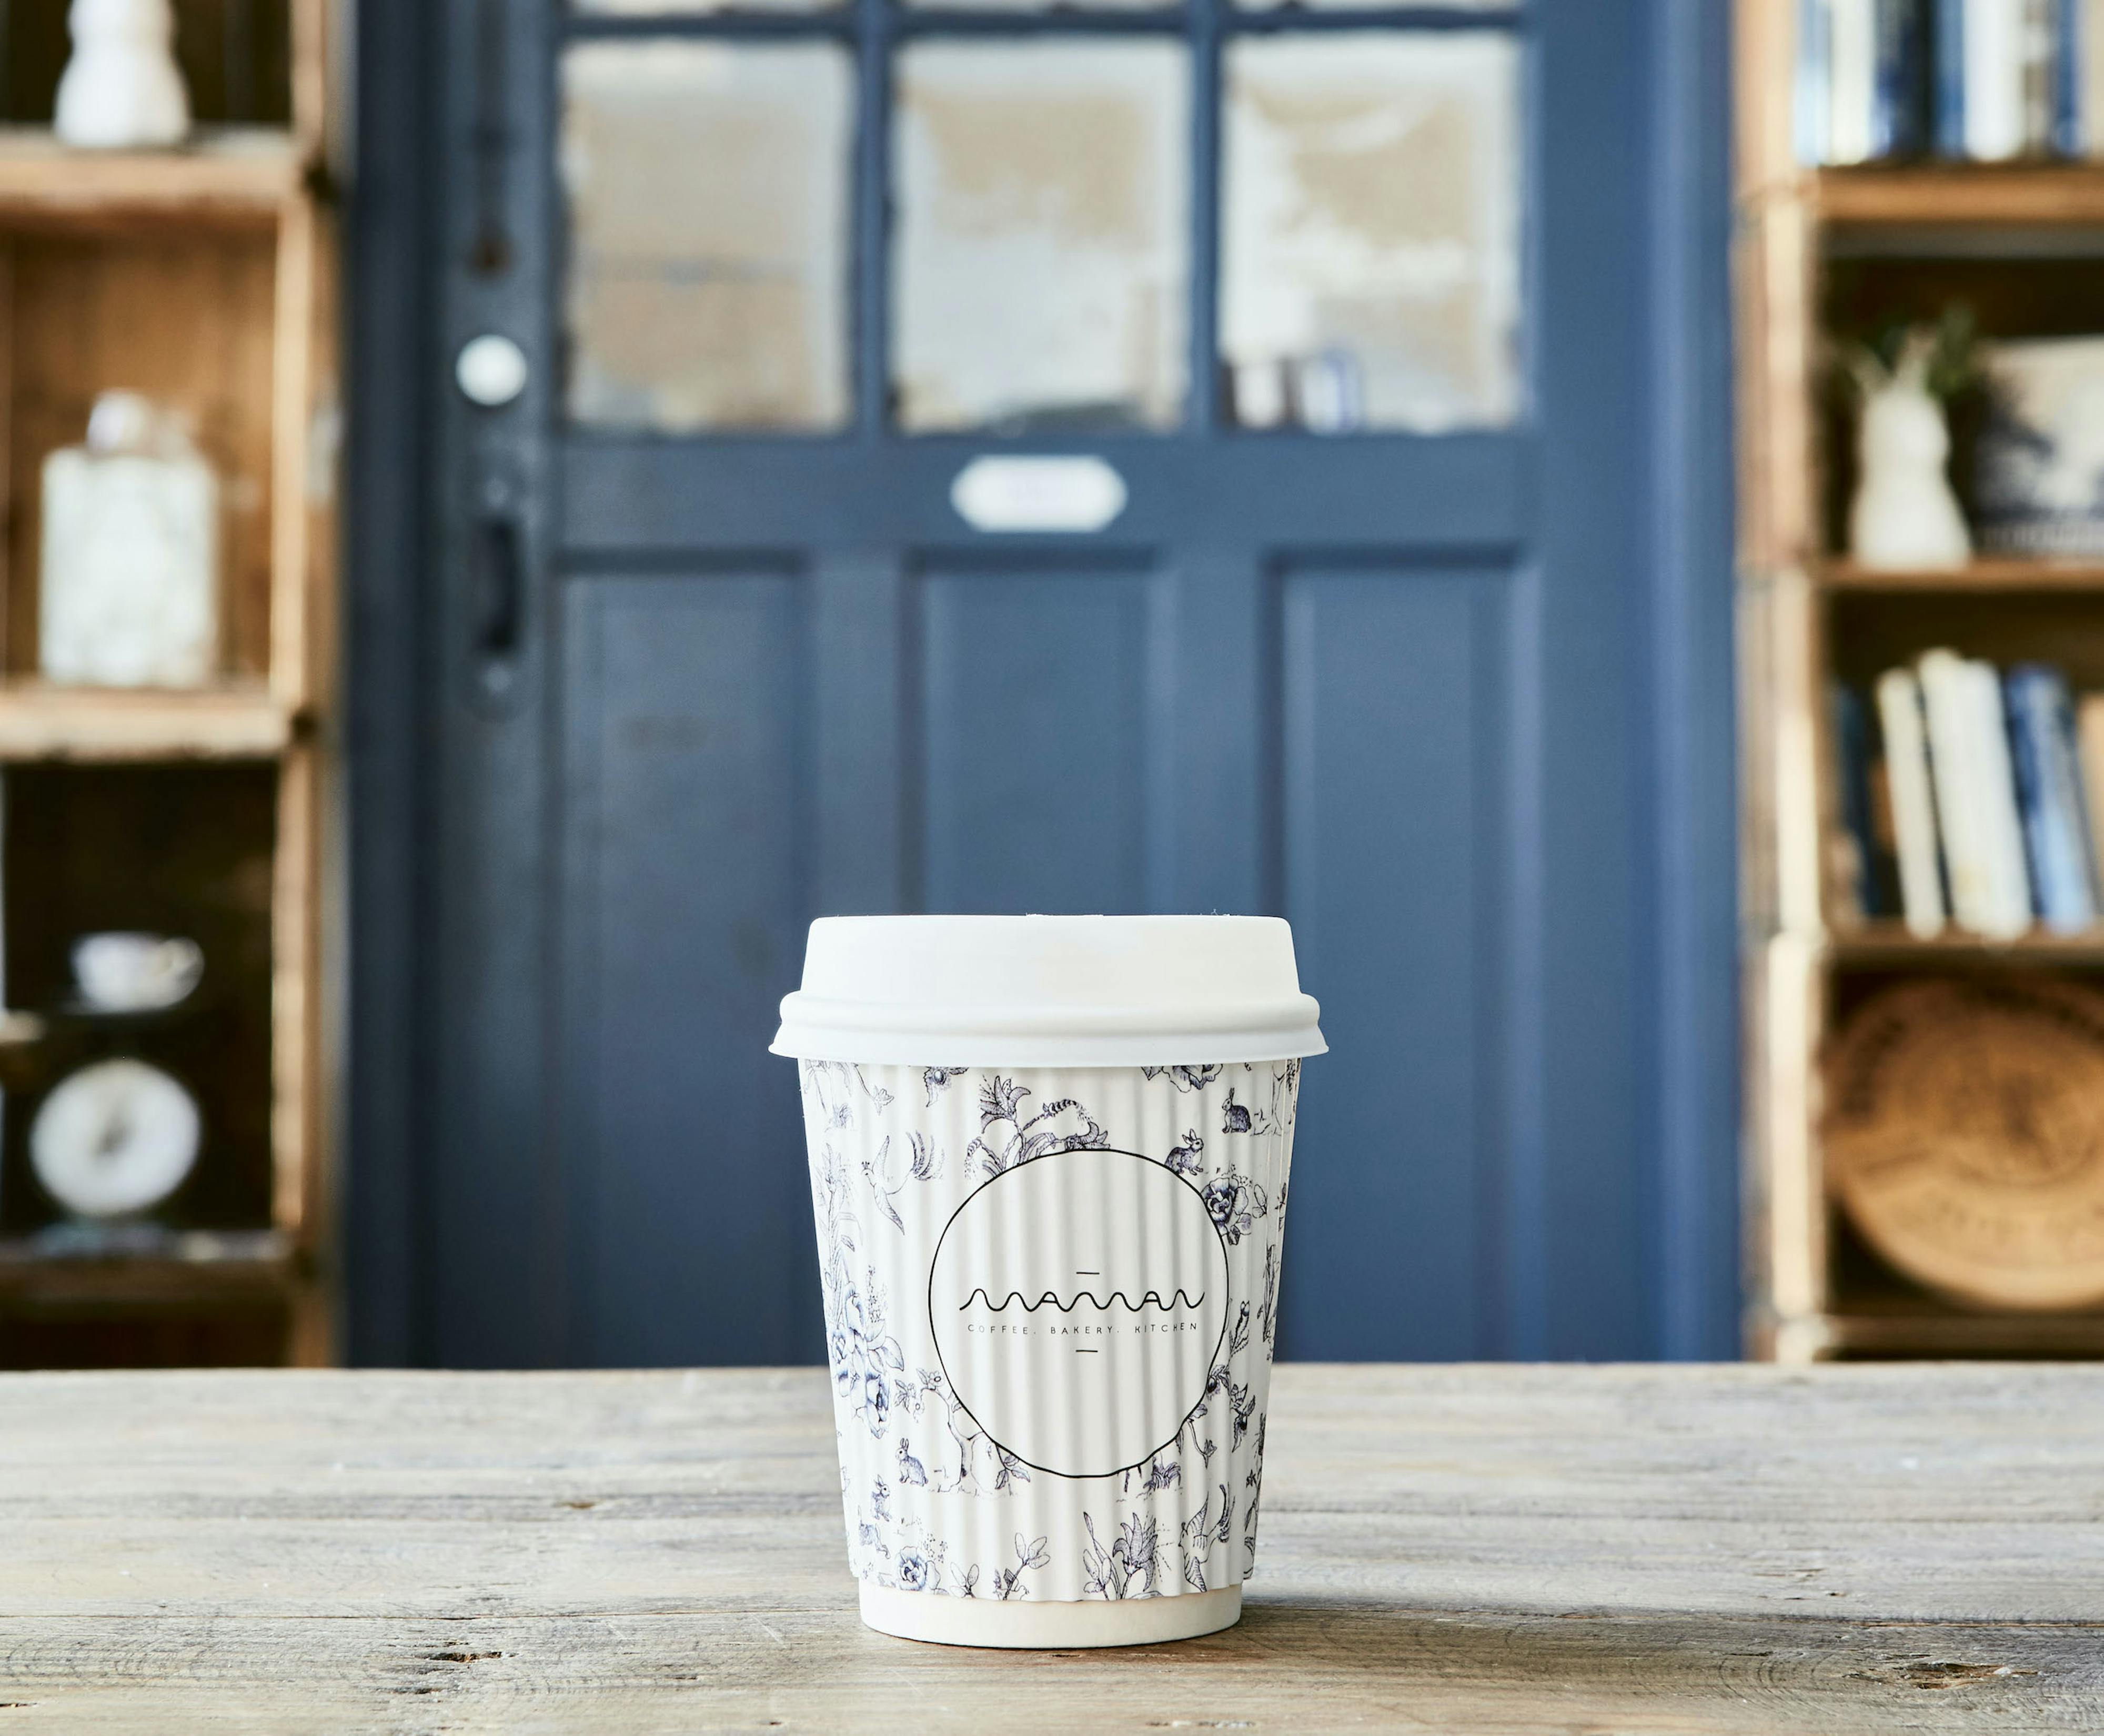 cup in front of blue door at hudson café